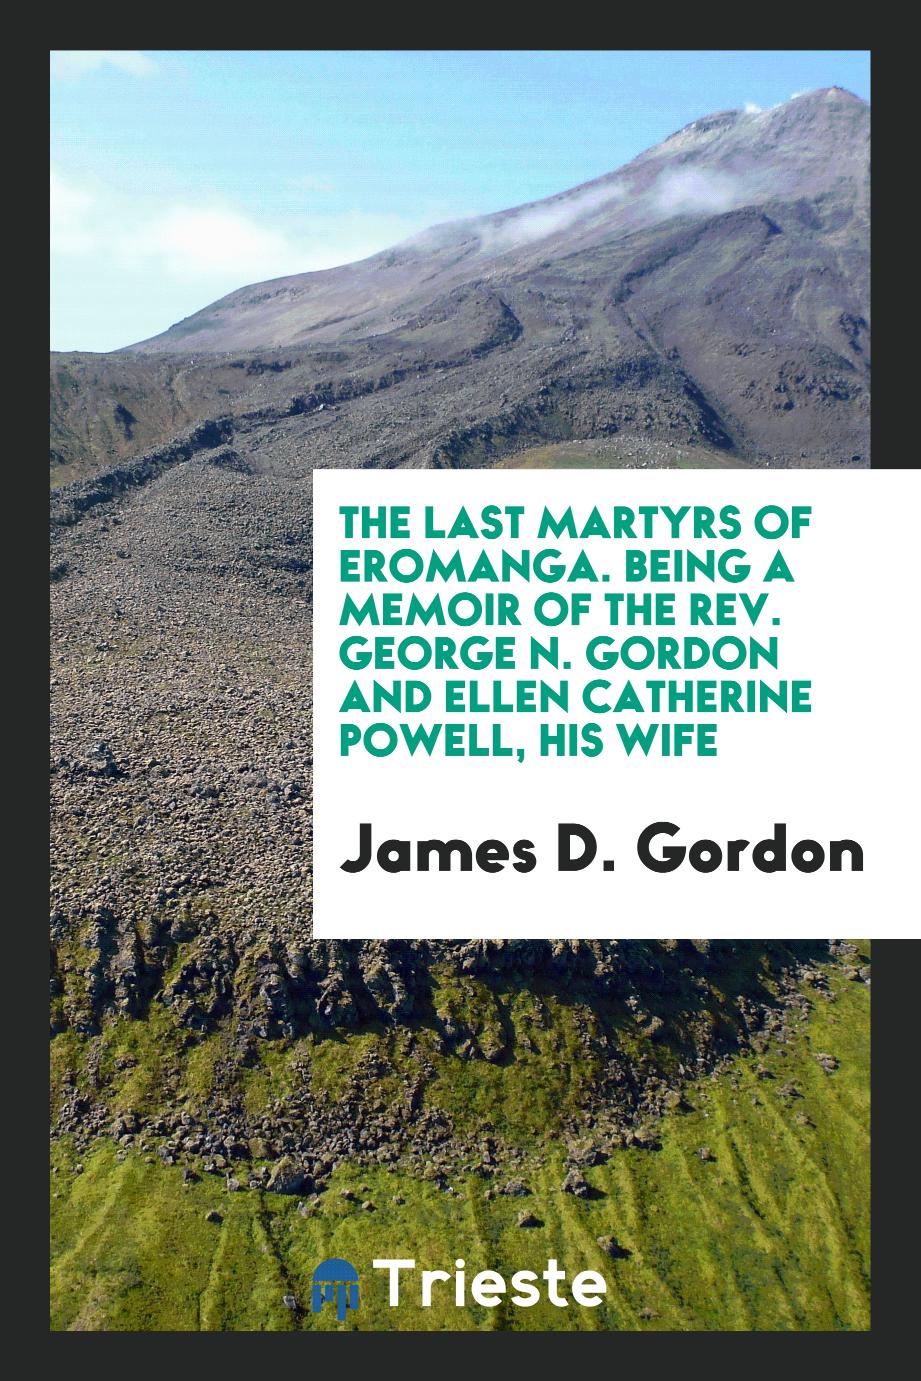 The Last Martyrs of Eromanga. Being a Memoir of the Rev. George N. Gordon and Ellen Catherine Powell, His Wife